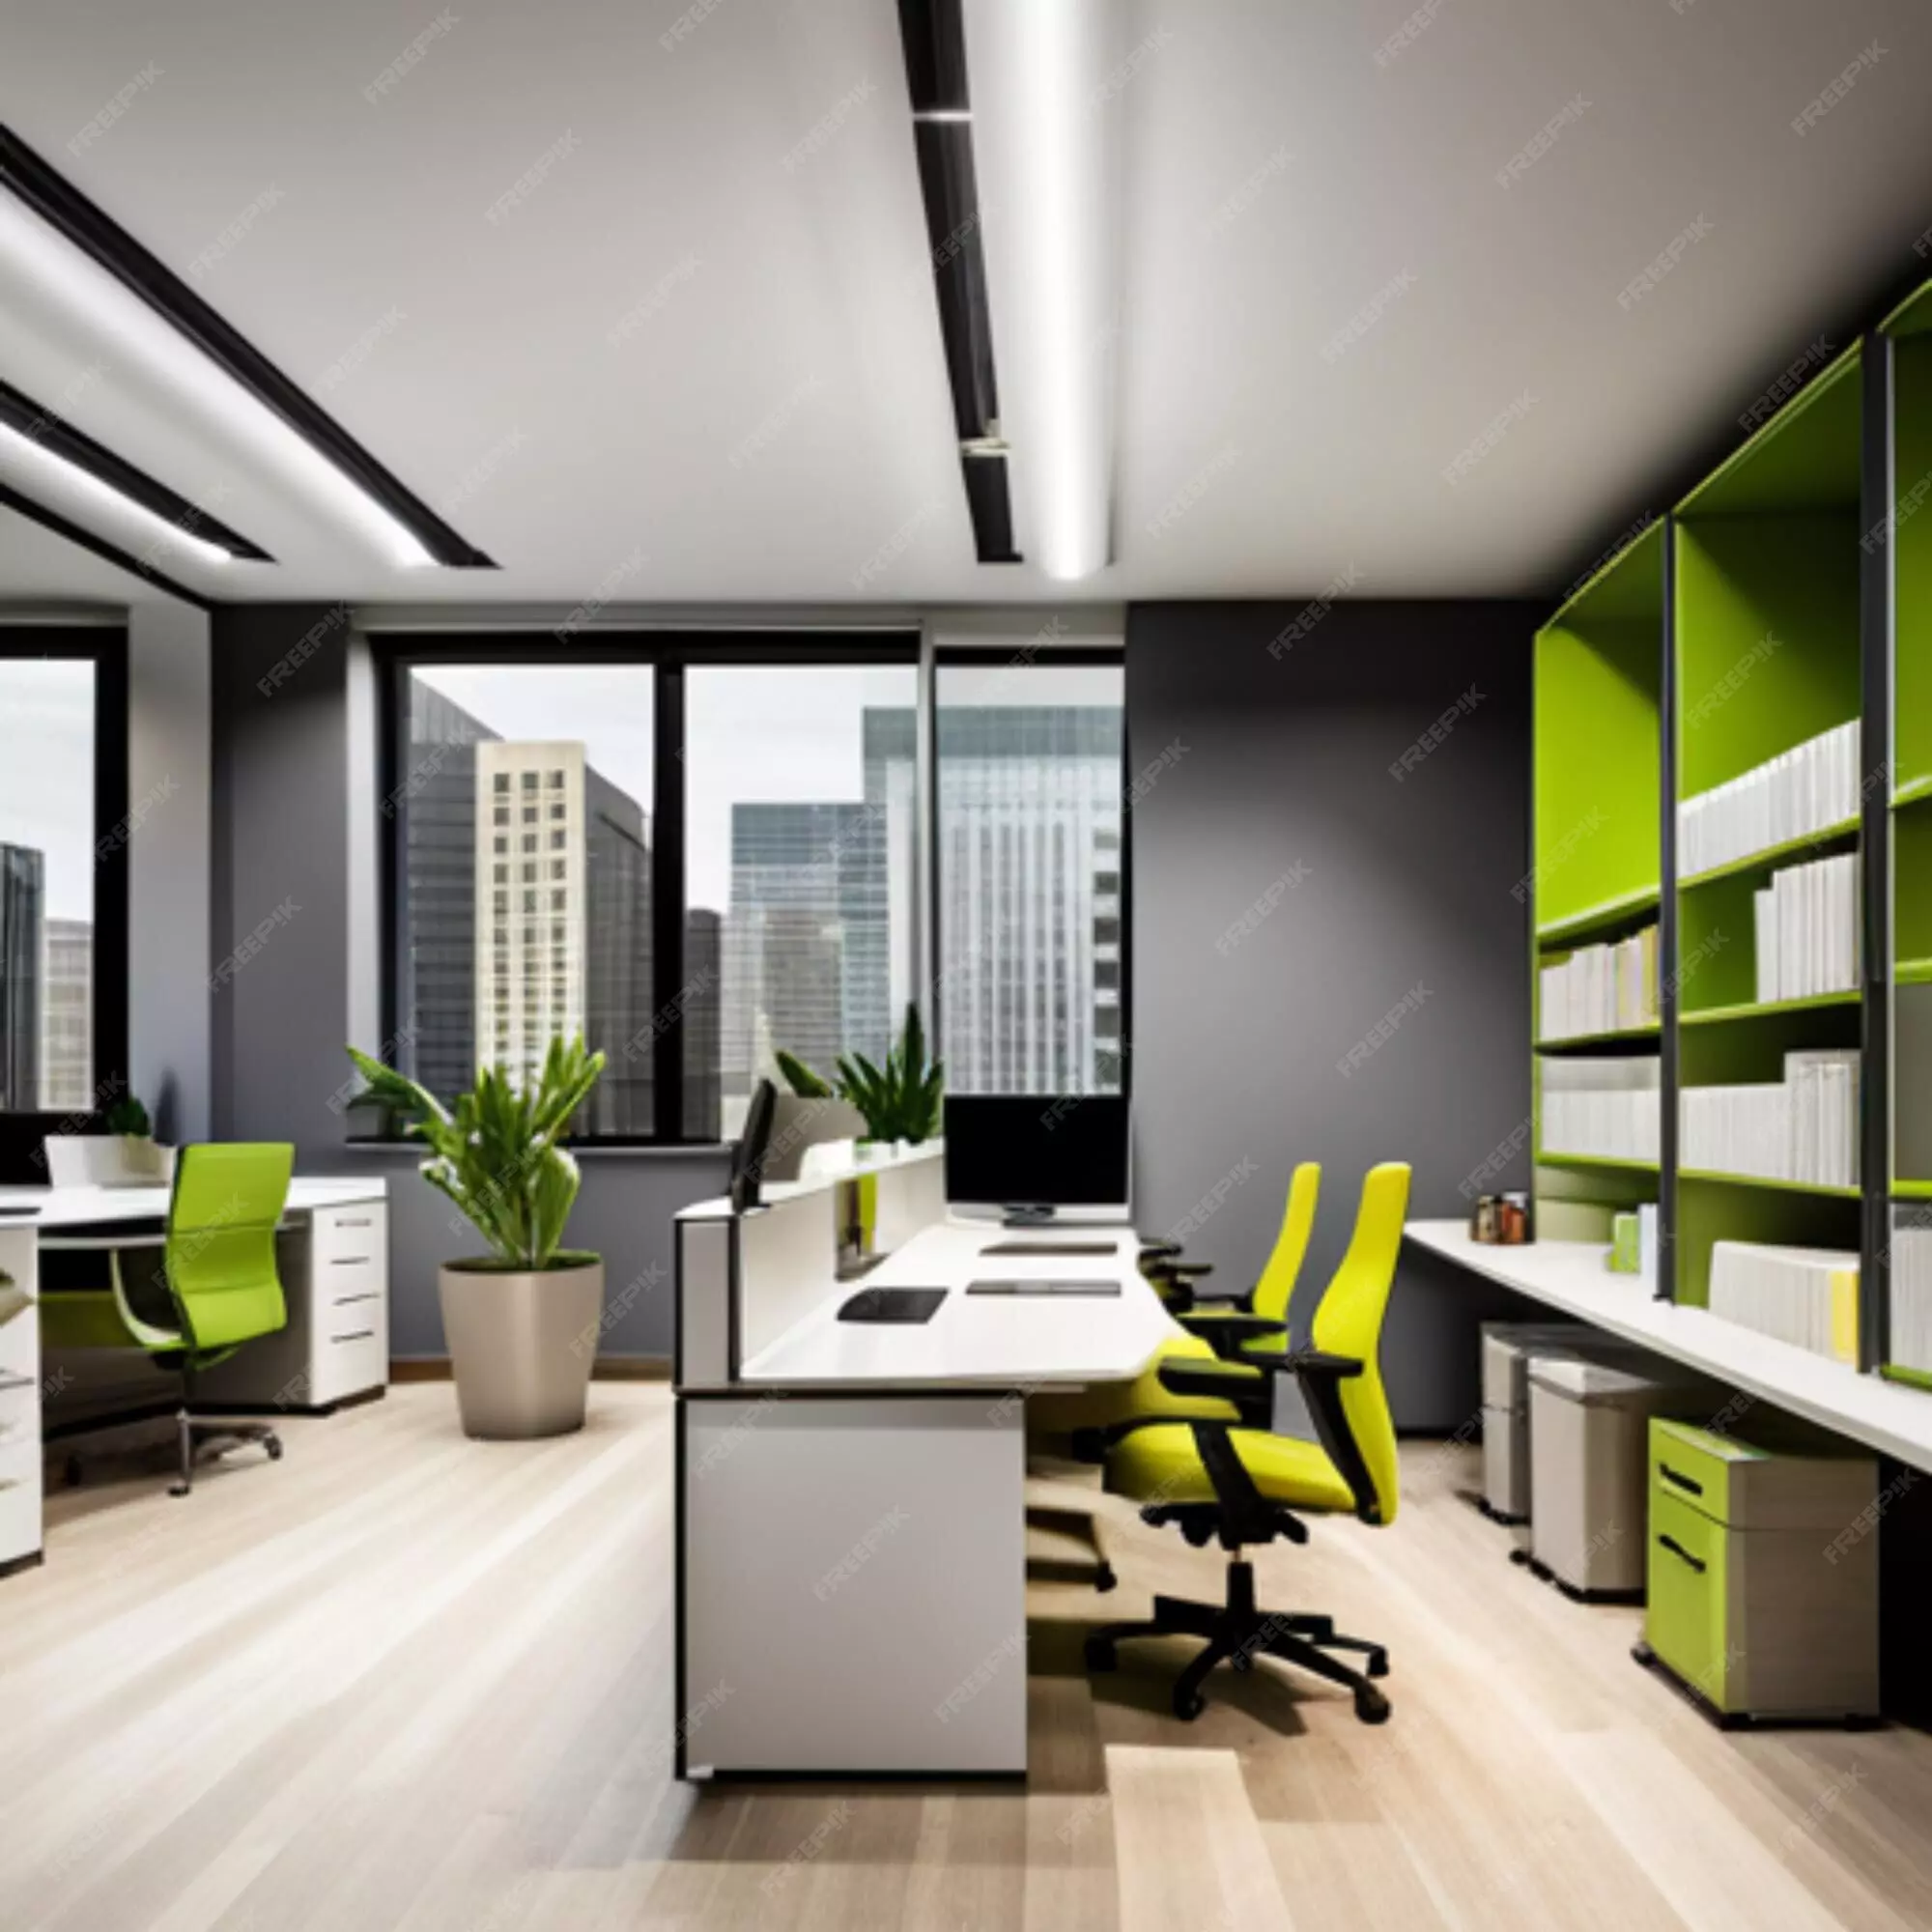 Colour, comfort, and connectivity in offices